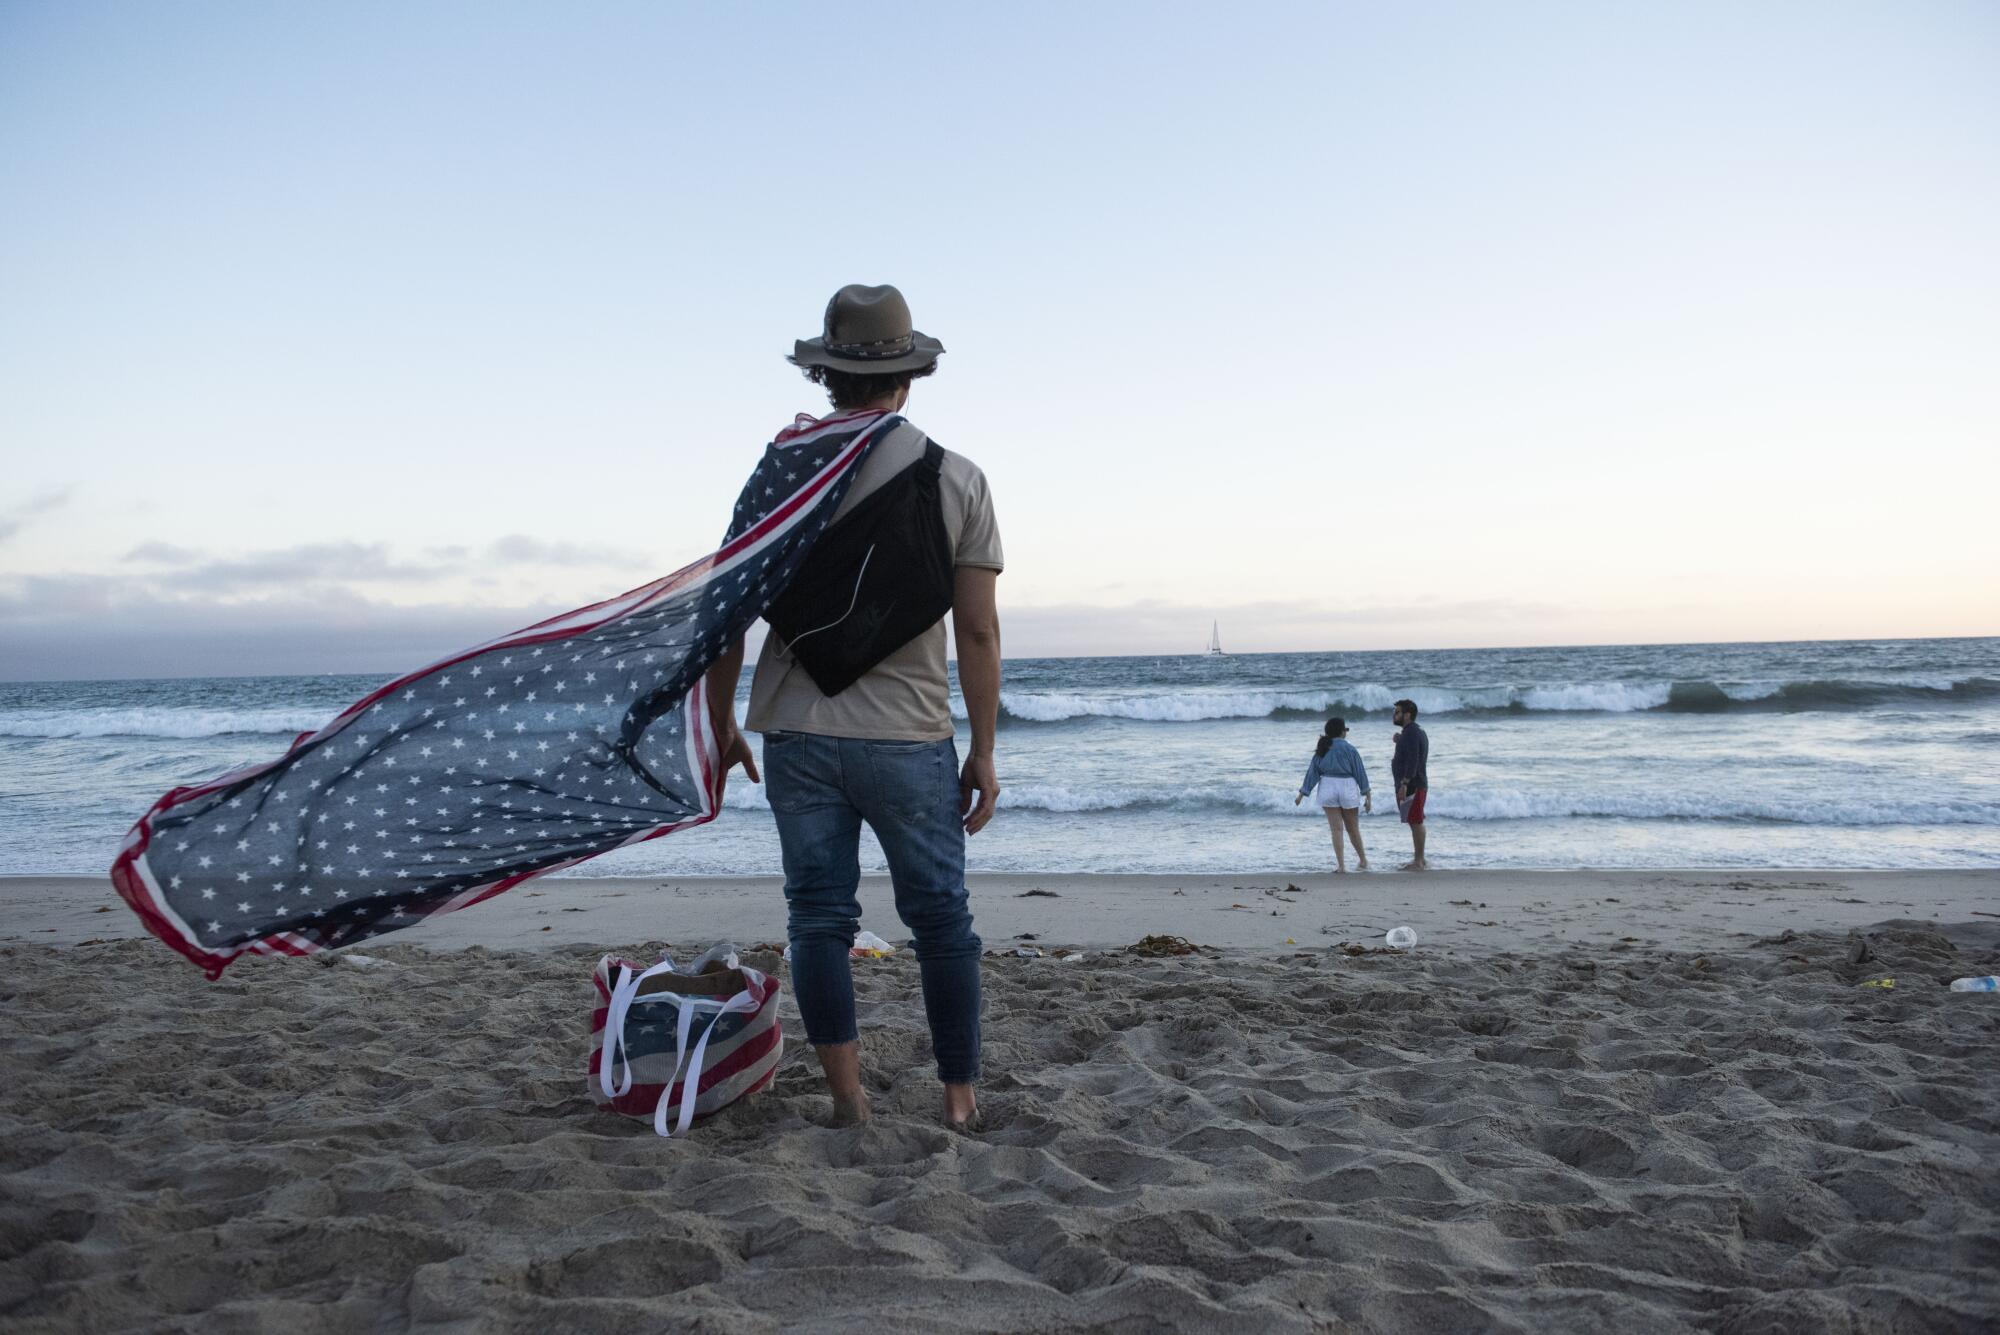 A beachgoer with a cape in U.S. flag colors stands on the sand looking out toward waves 